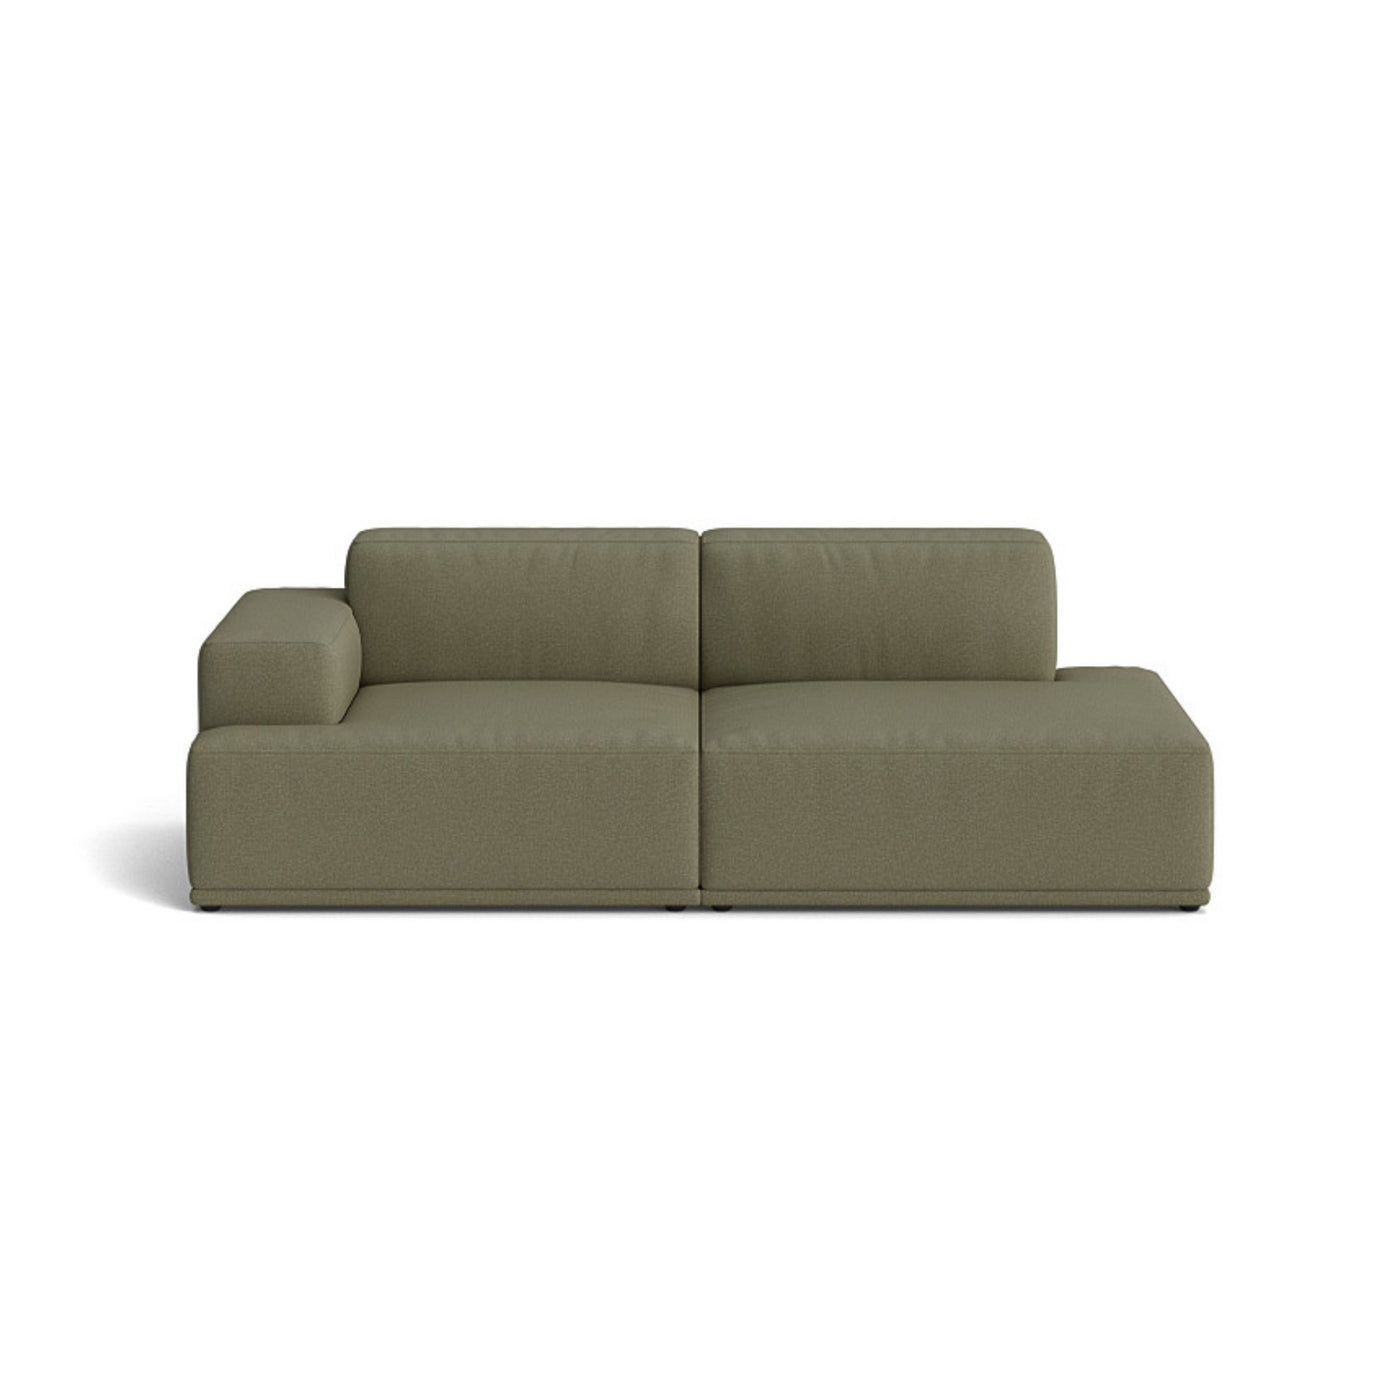 Muuto Connect Soft Modular 2 Seater Sofa, configuration 2. made-to-order from someday designs. #colour_clay-17